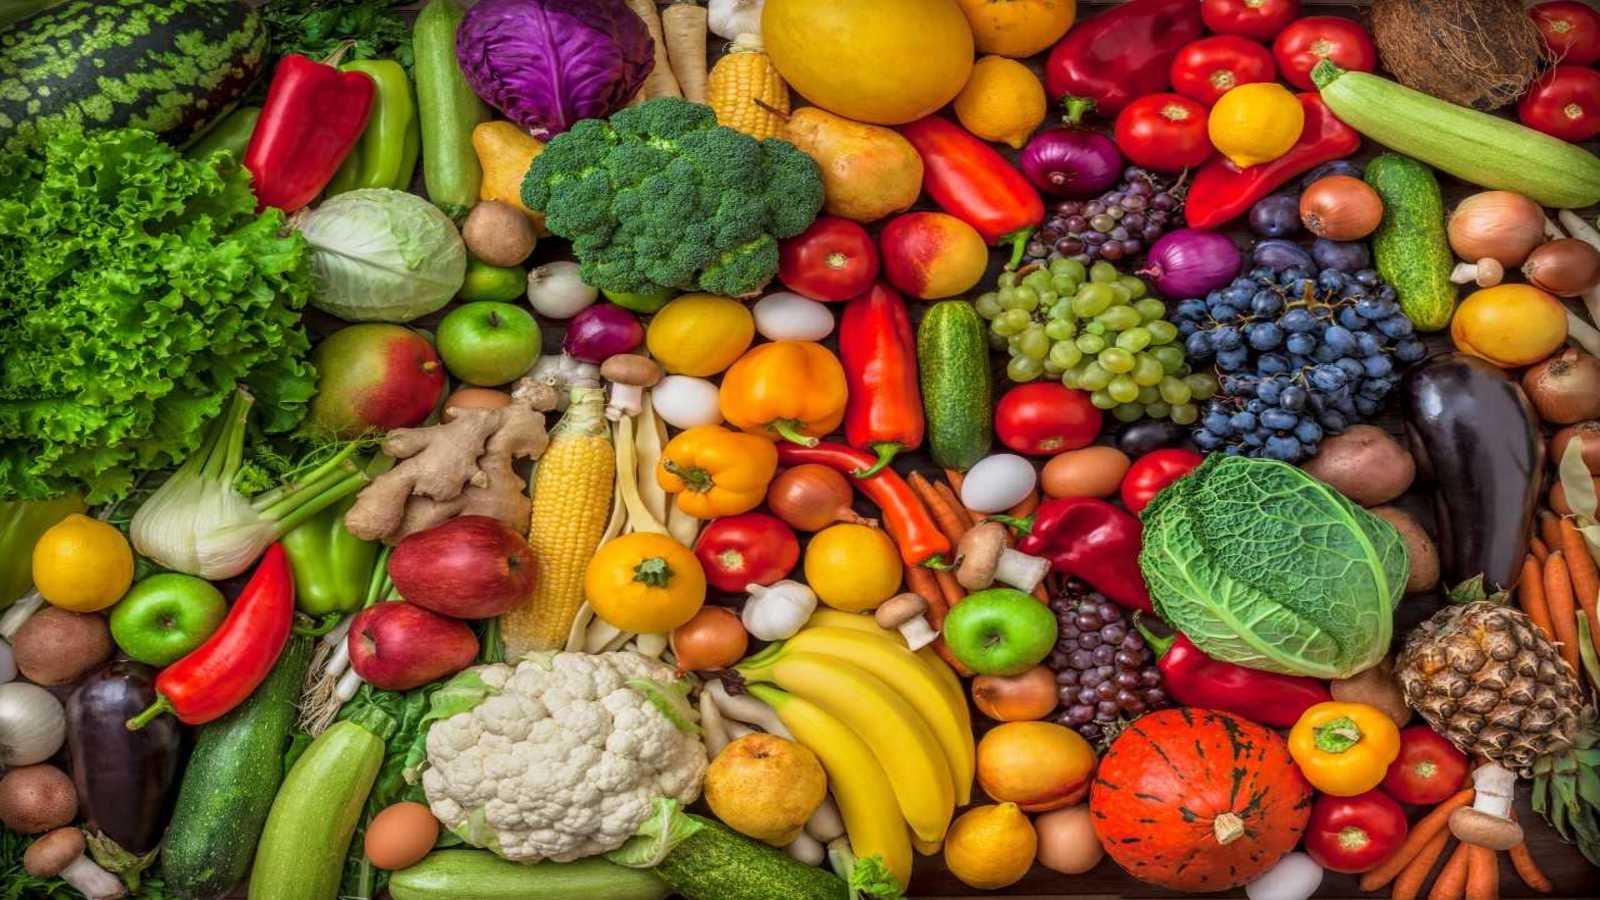 New Zealand, Australia to sign off on importation of irradiated fruits, vegetables